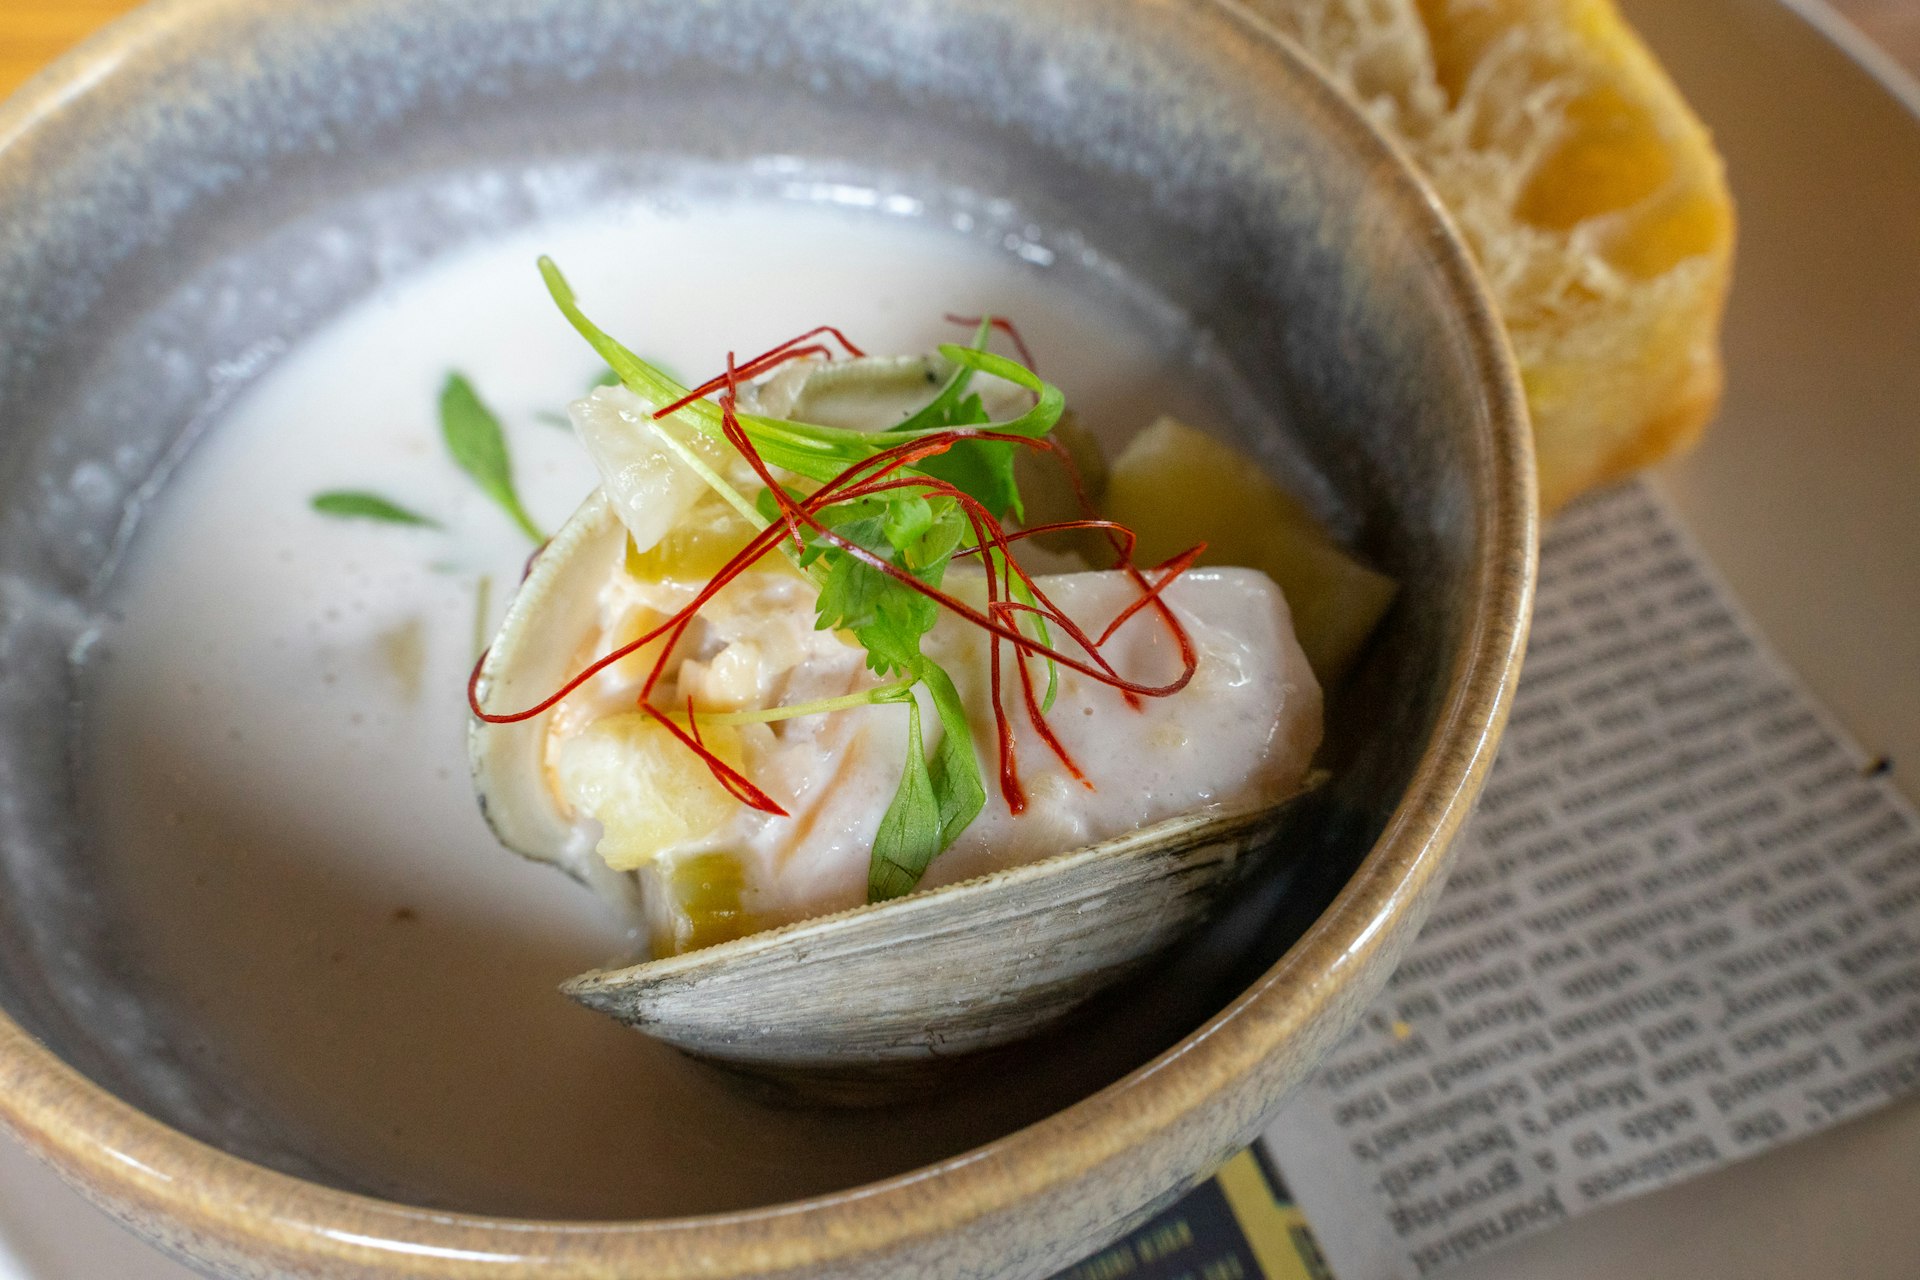 A glazed stoneware bowl of clam chowder at Union in Portland, Maine, features a light white broth against which micro greens and bright red saffron strands stand out as they drape of a clam still in-shell